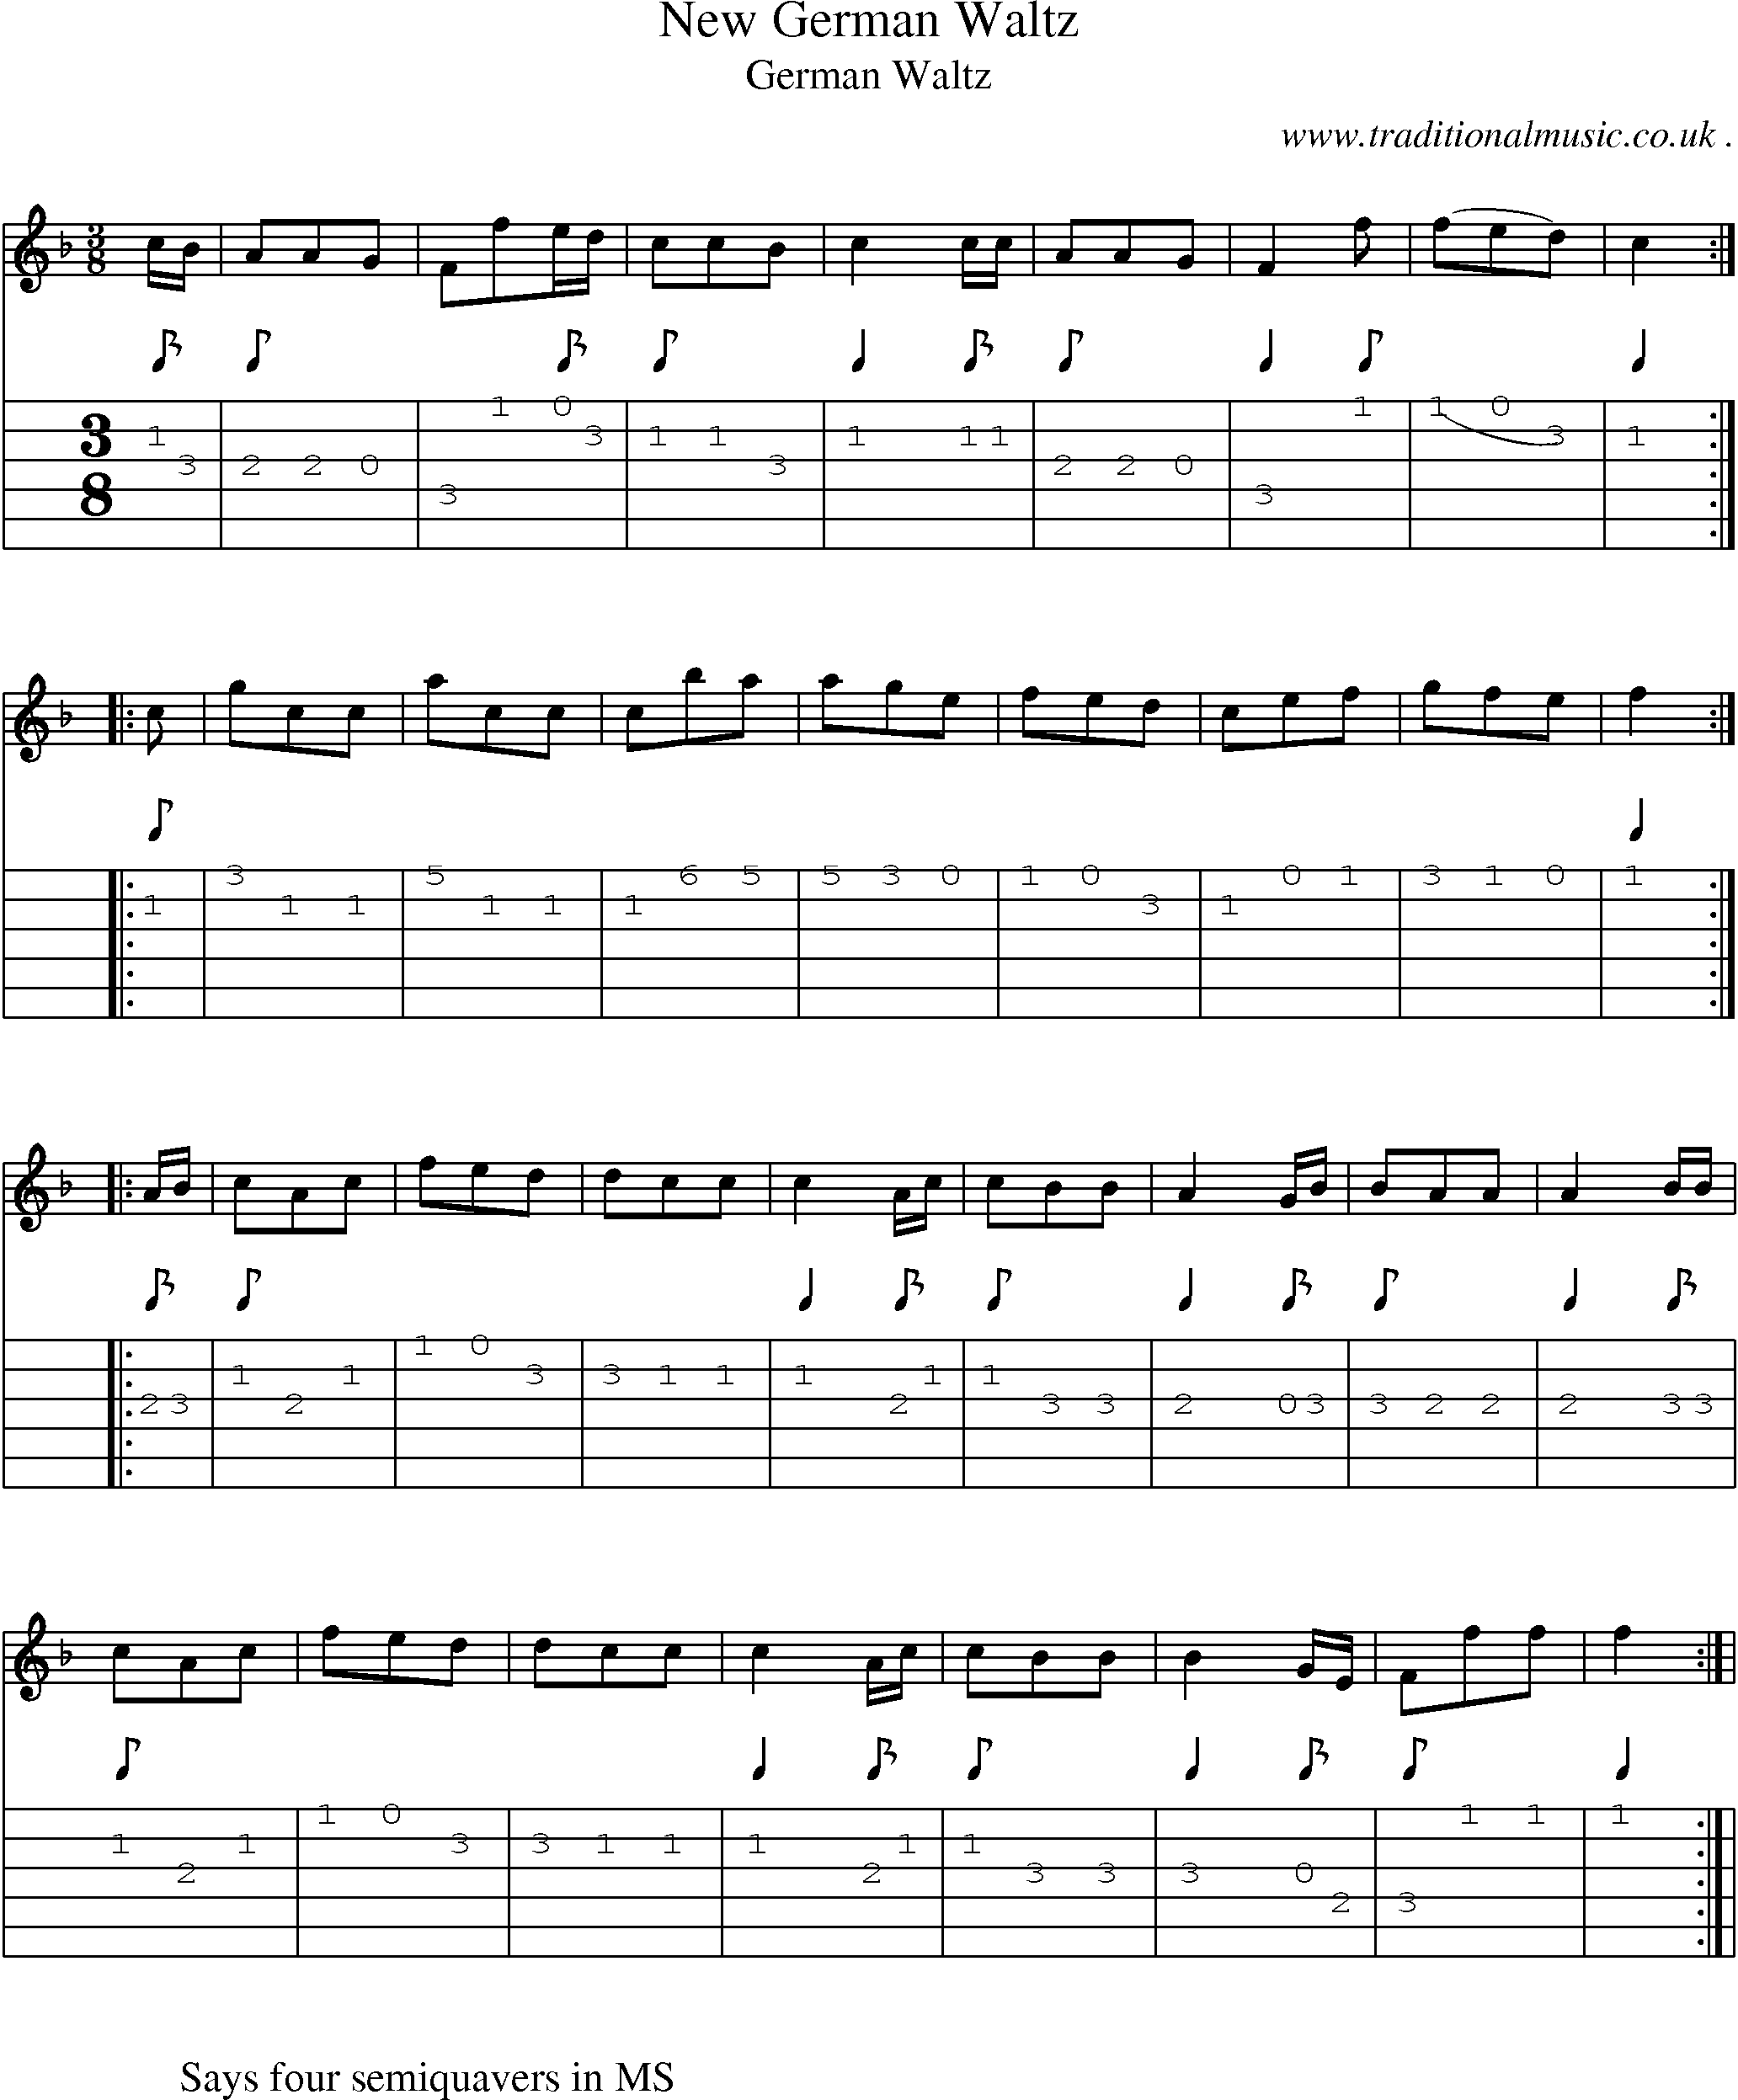 Sheet-Music and Guitar Tabs for New German Waltz